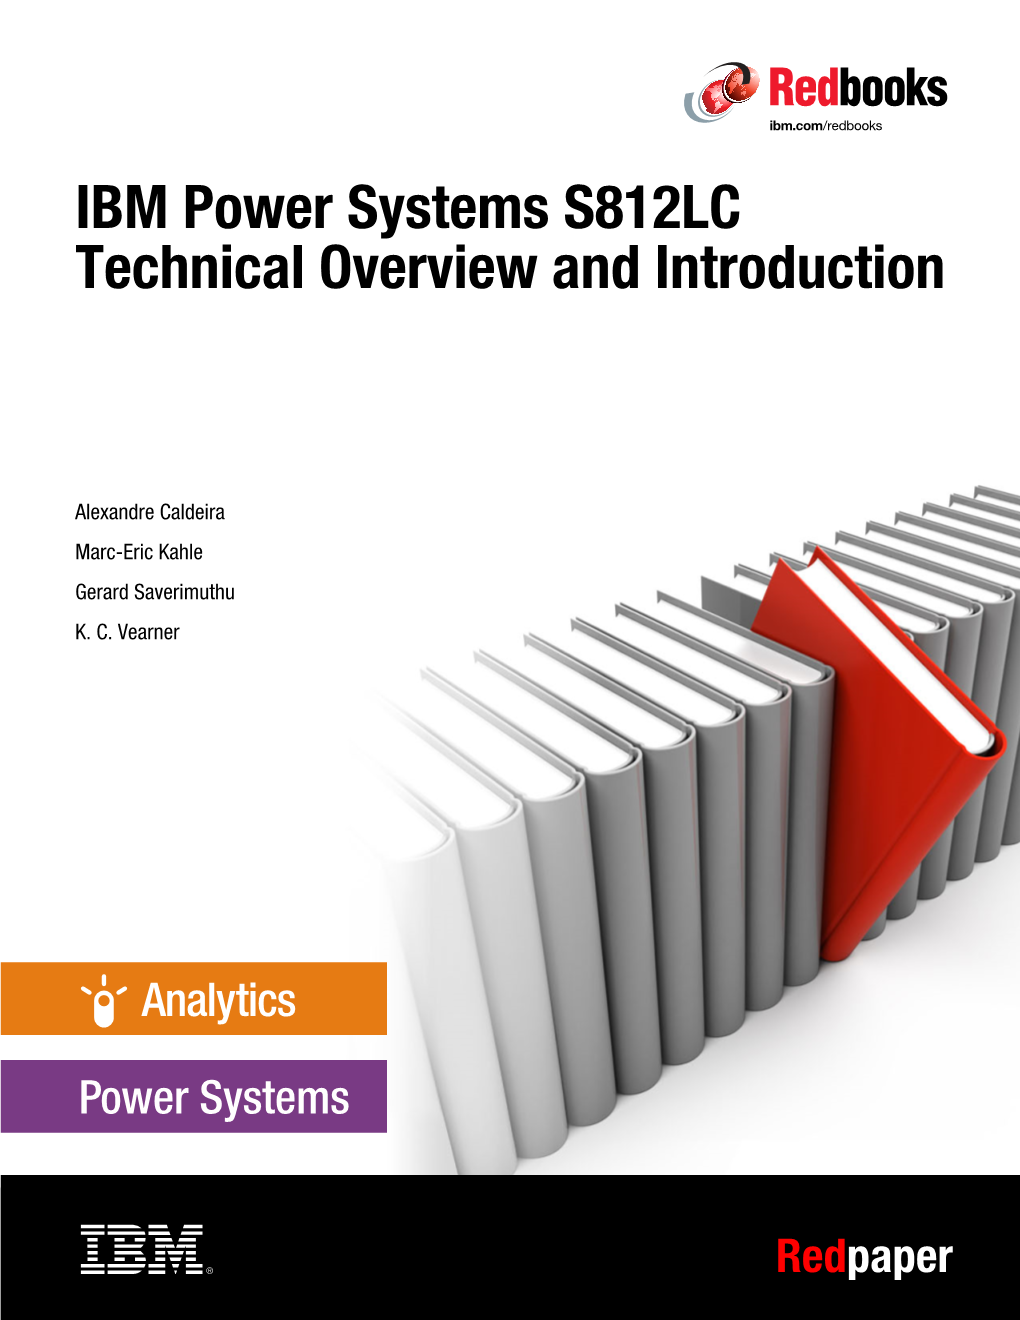 IBM Power Systems S812LC Technical Overview and Introduction